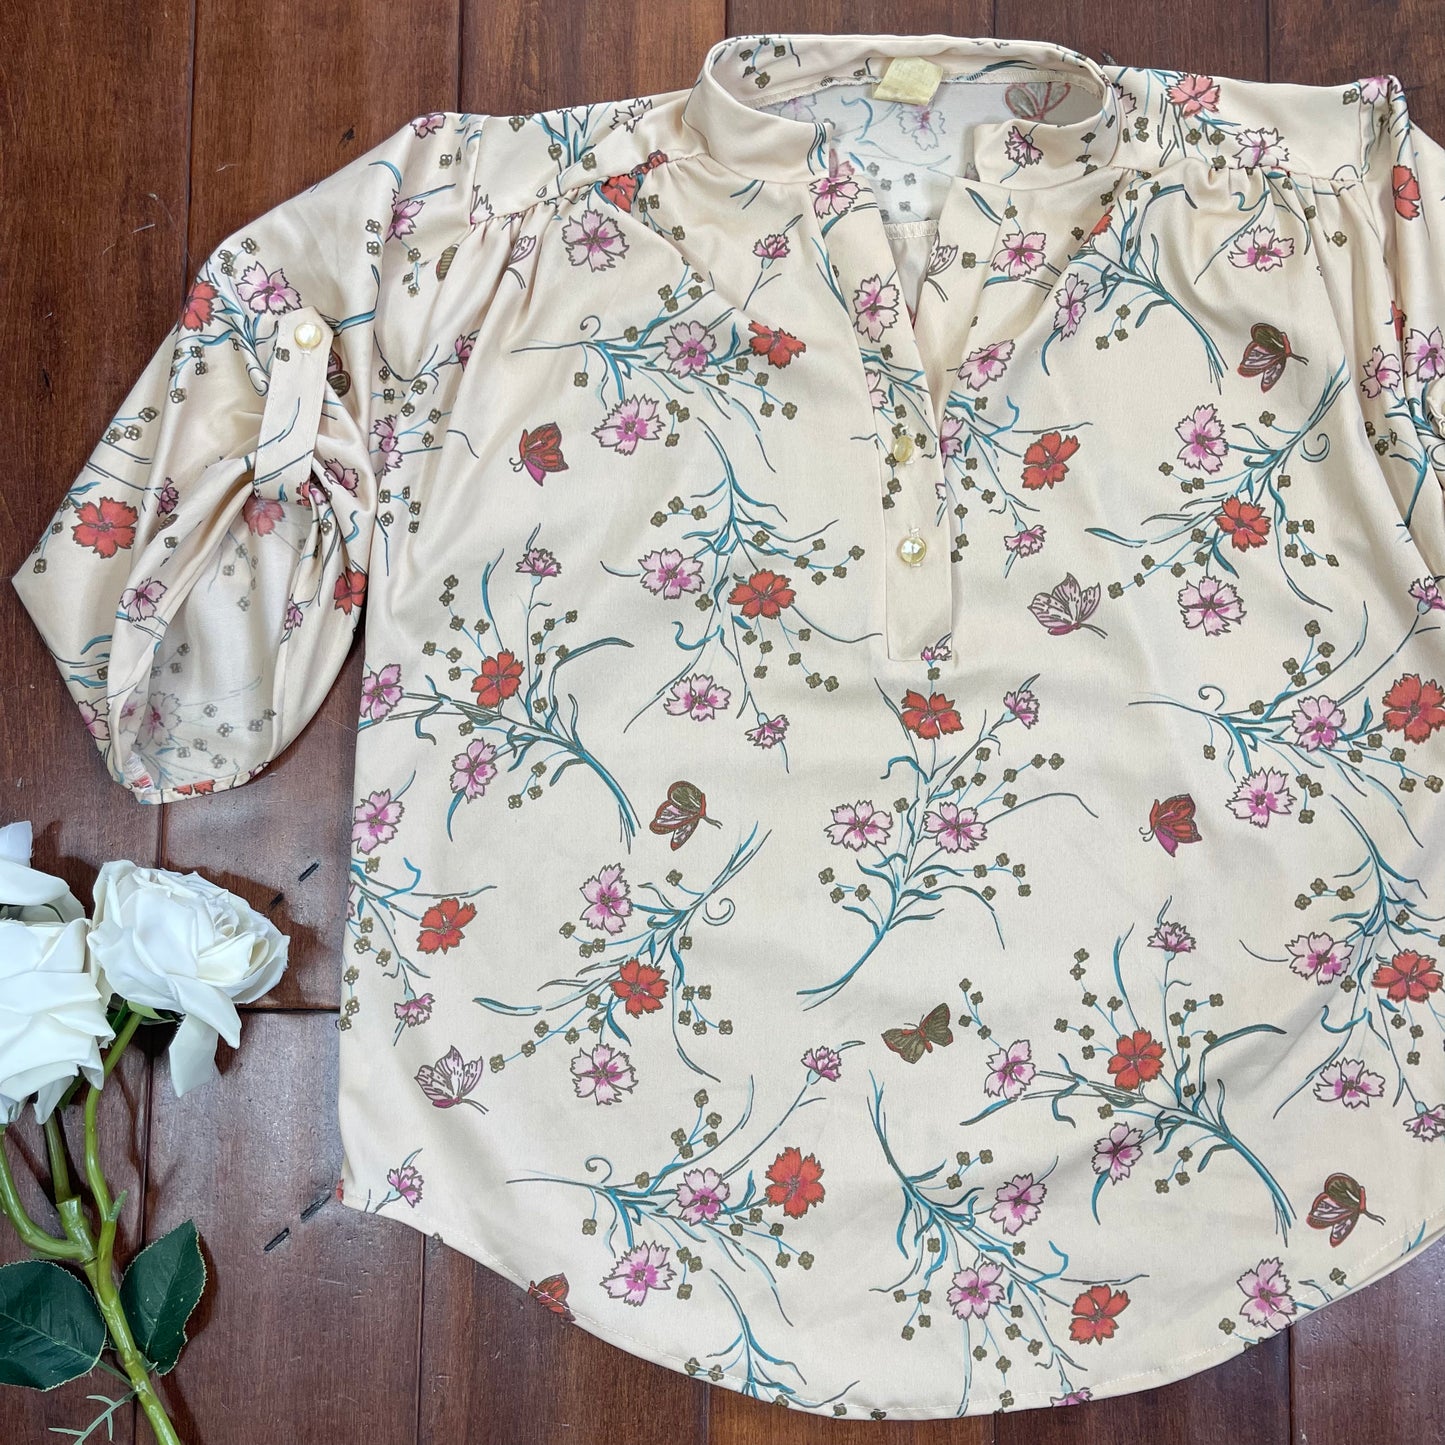 VINTAGE 70’S FLORAL BUTTERFLY GARDEN TOP